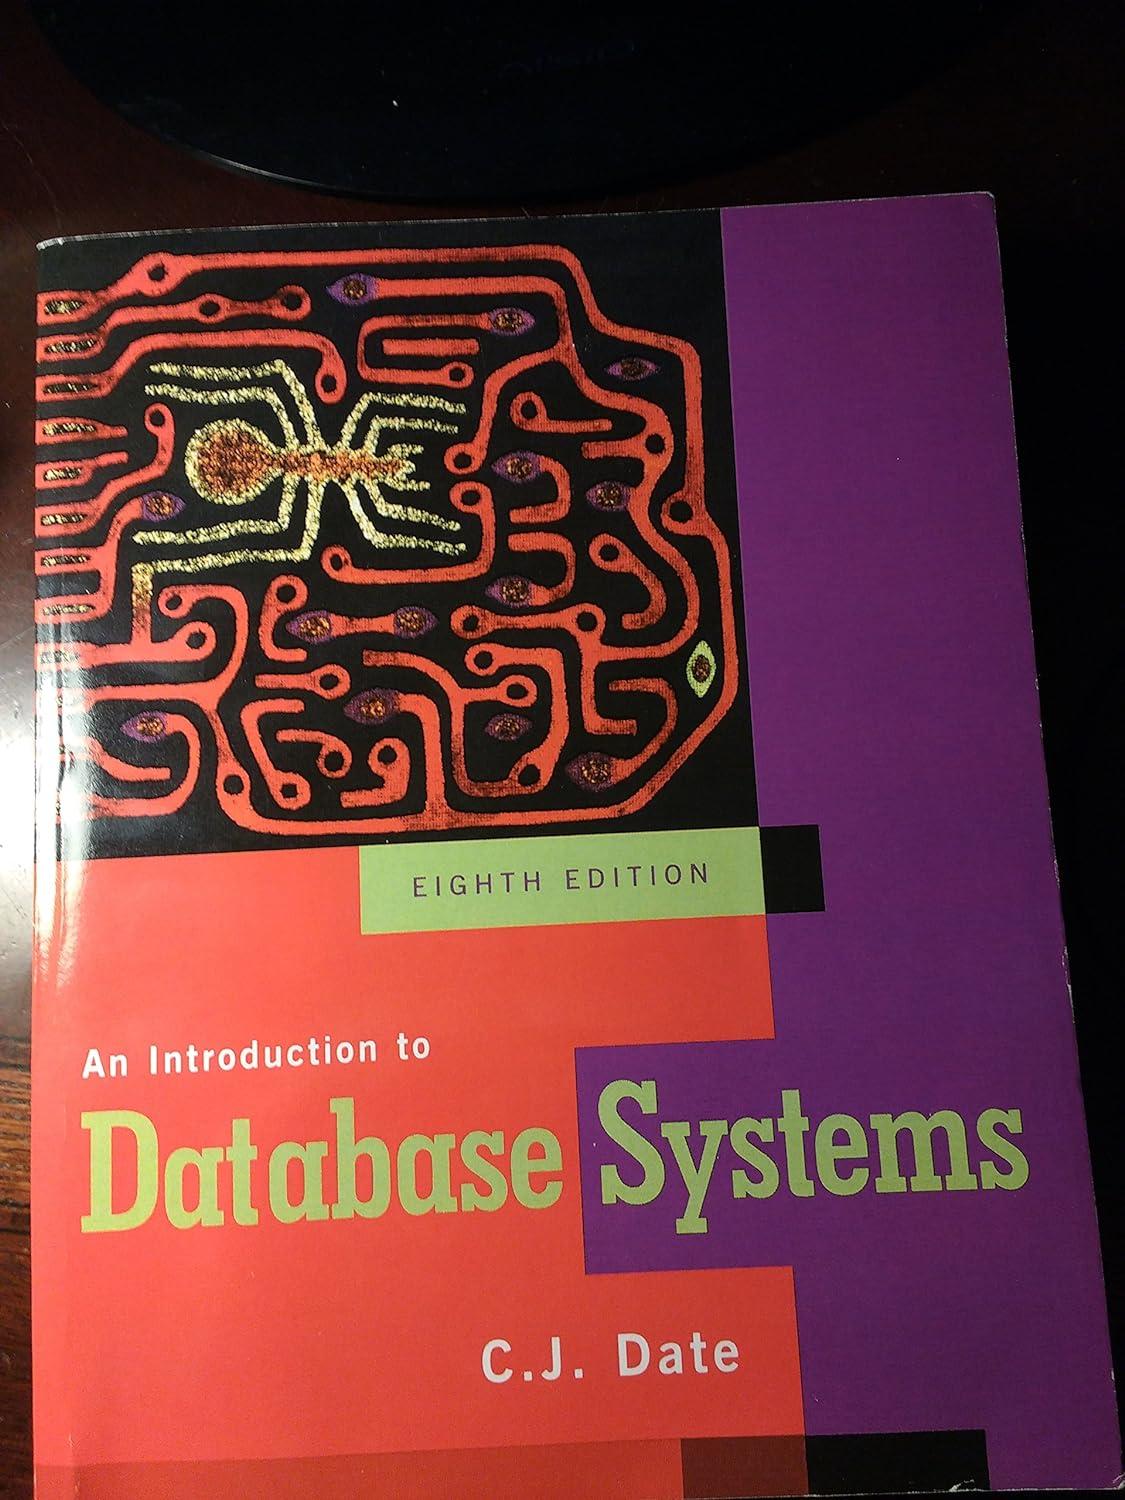 introduction to database systems 8th edition c. j. date 0321197844, 978-0321197849